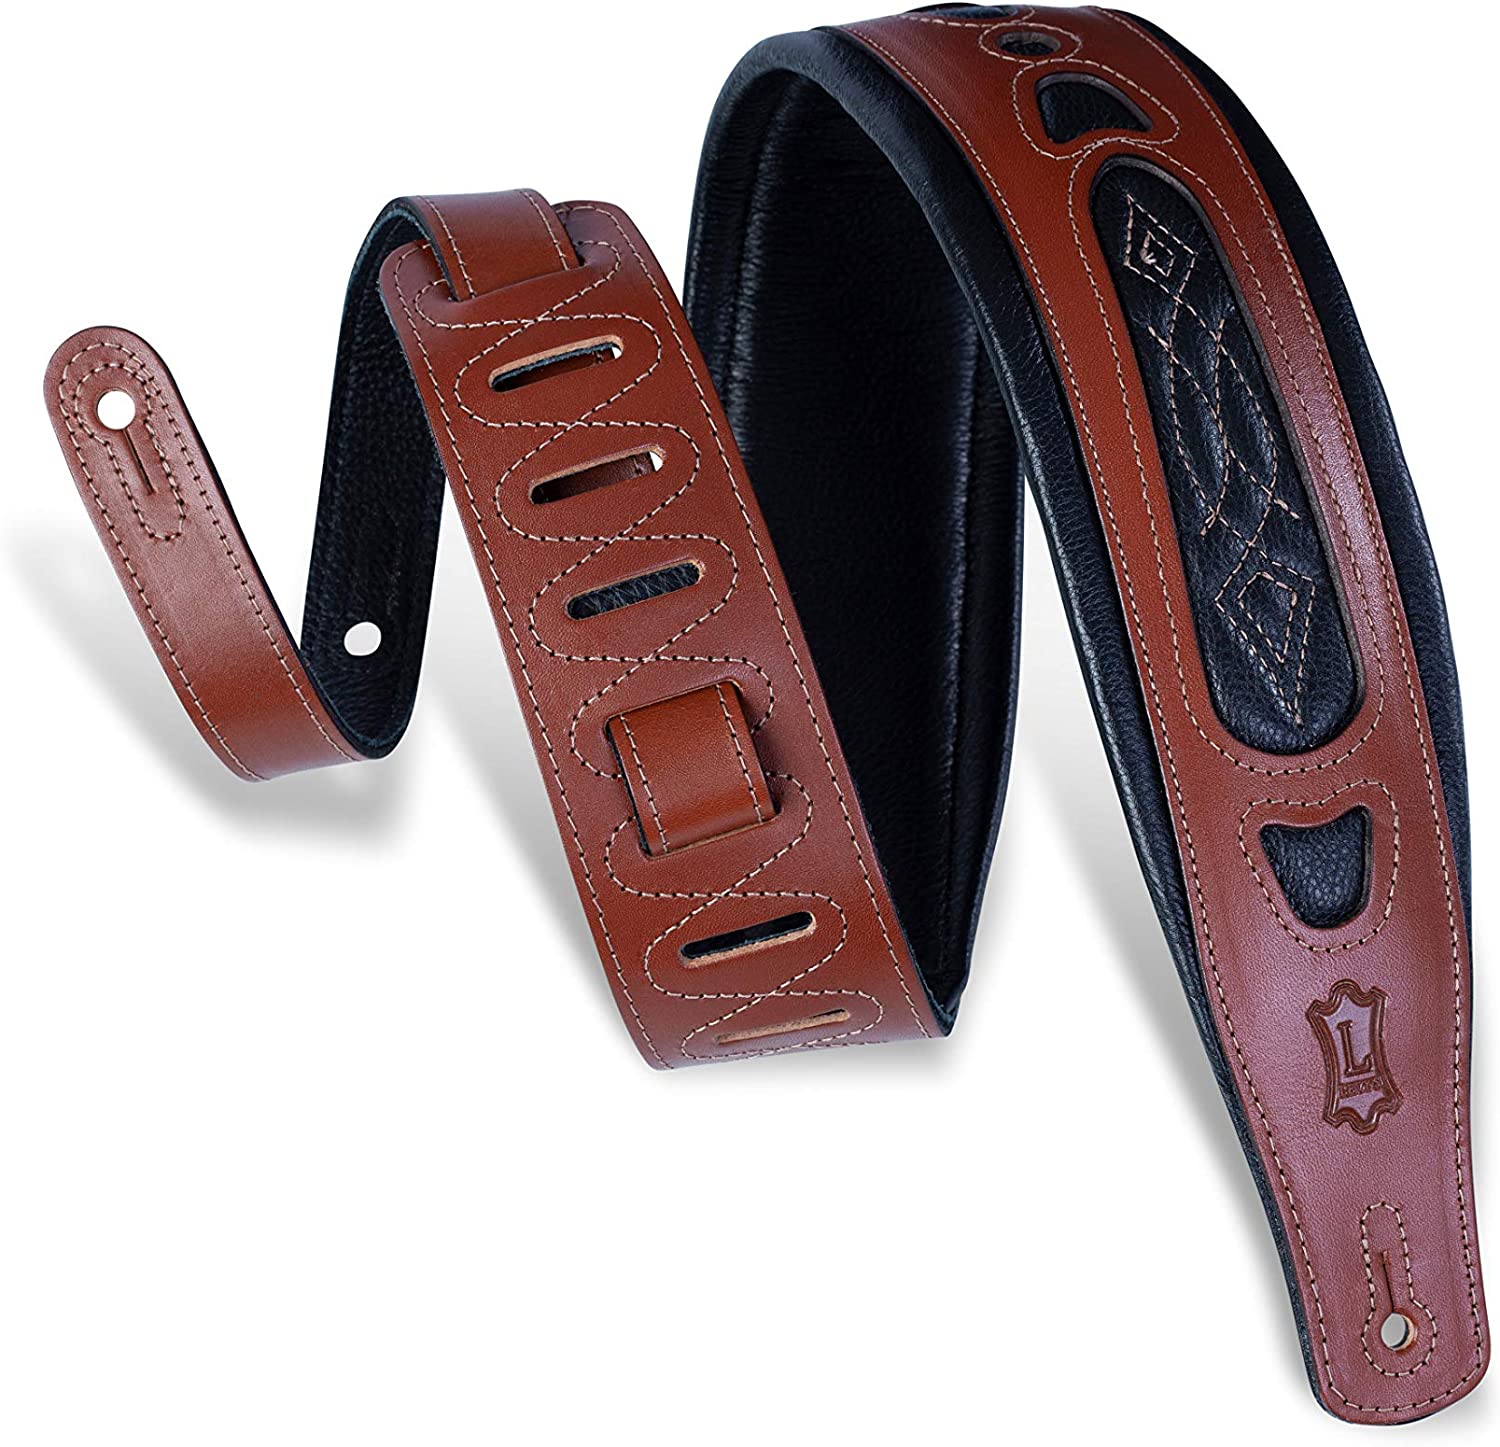 Levy's Leathers PM31-WAL Veg-Tan Leather Guitar Strap on a white background